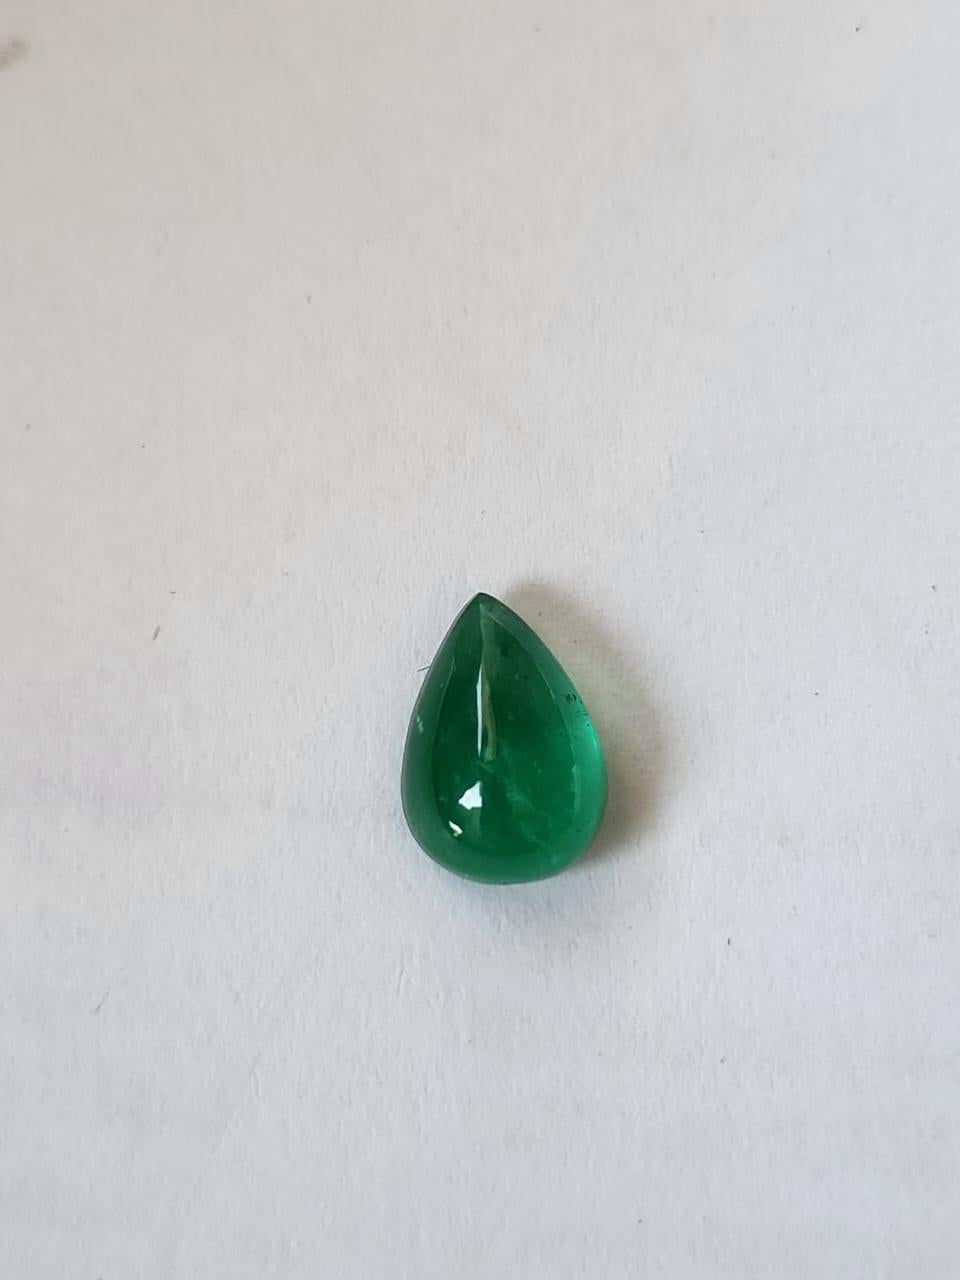 Natural Beautiful Zambia Emerald Gemstone.
3.02 Carat with a elegant Green color and excellent clarity. Zambia Origin Also has an excellent fancy pear shape with ideal polish to show great shine and color . It will look authentic in jewellery. The